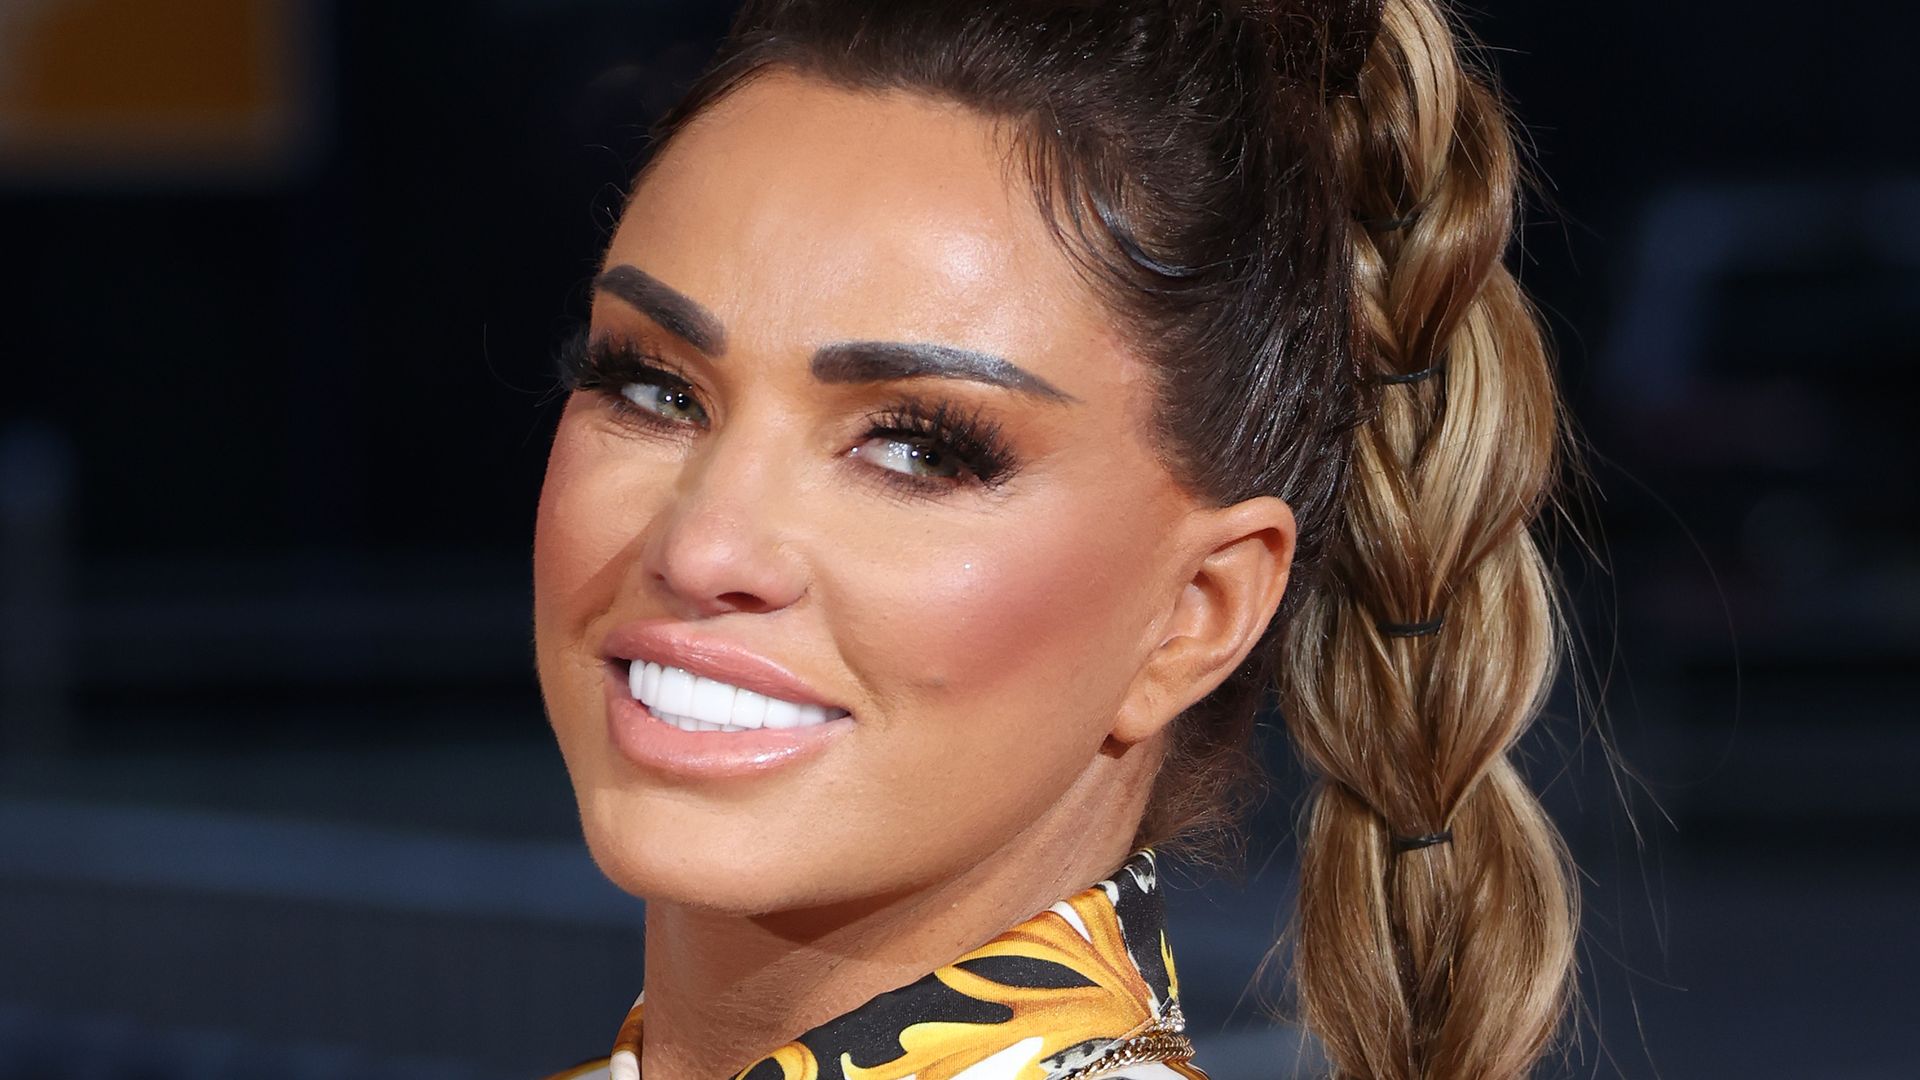 Katie Price Advocates for Age Limit on Facial Fillers Despite Extensive Surgical History